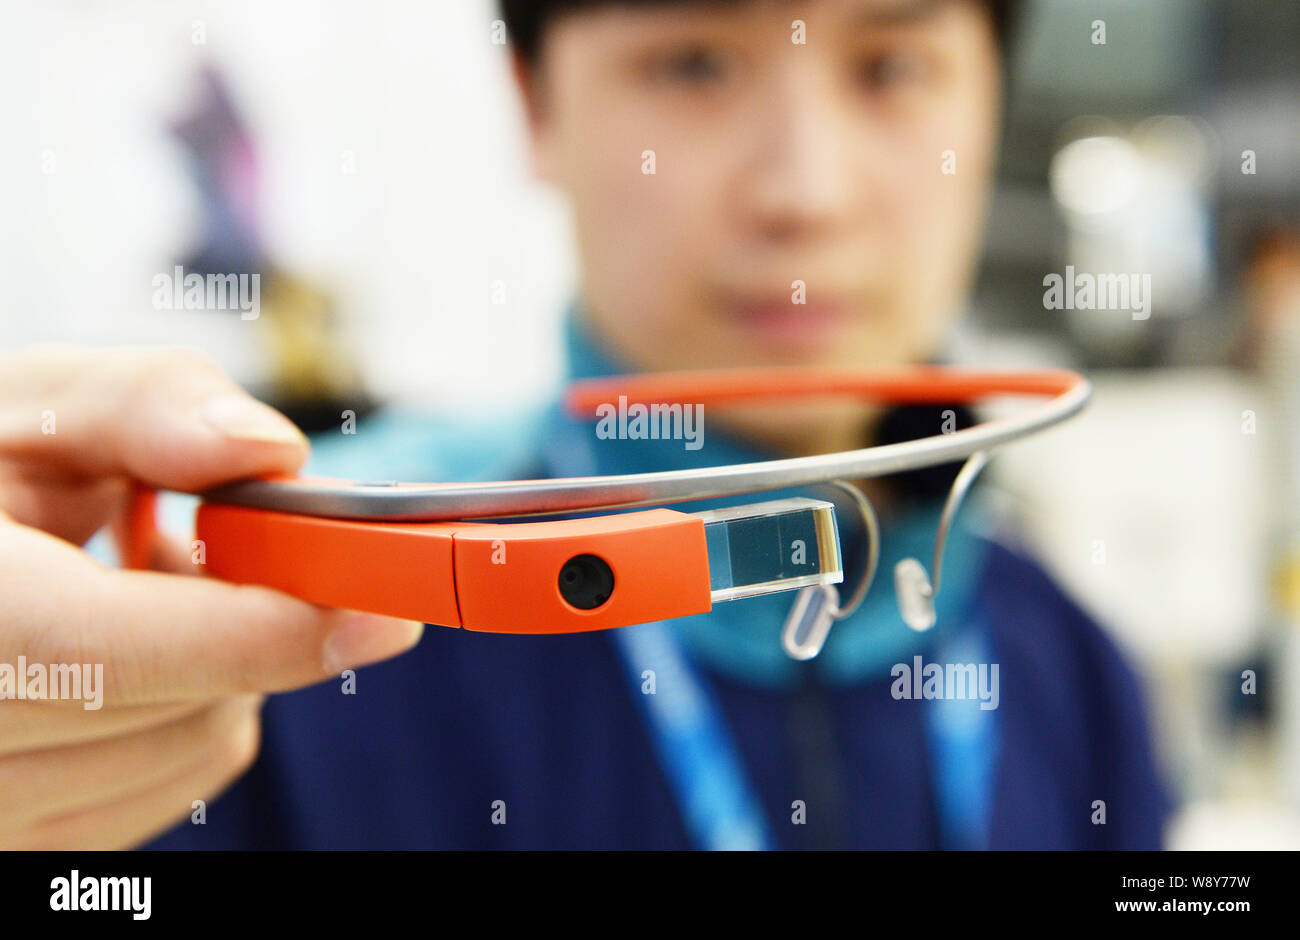 An employee shows Google Glass at a Suning home appliances store in Shanghai, China, 8 May 2014.   Google Glass makes first appearance at a Suning hom Stock Photo